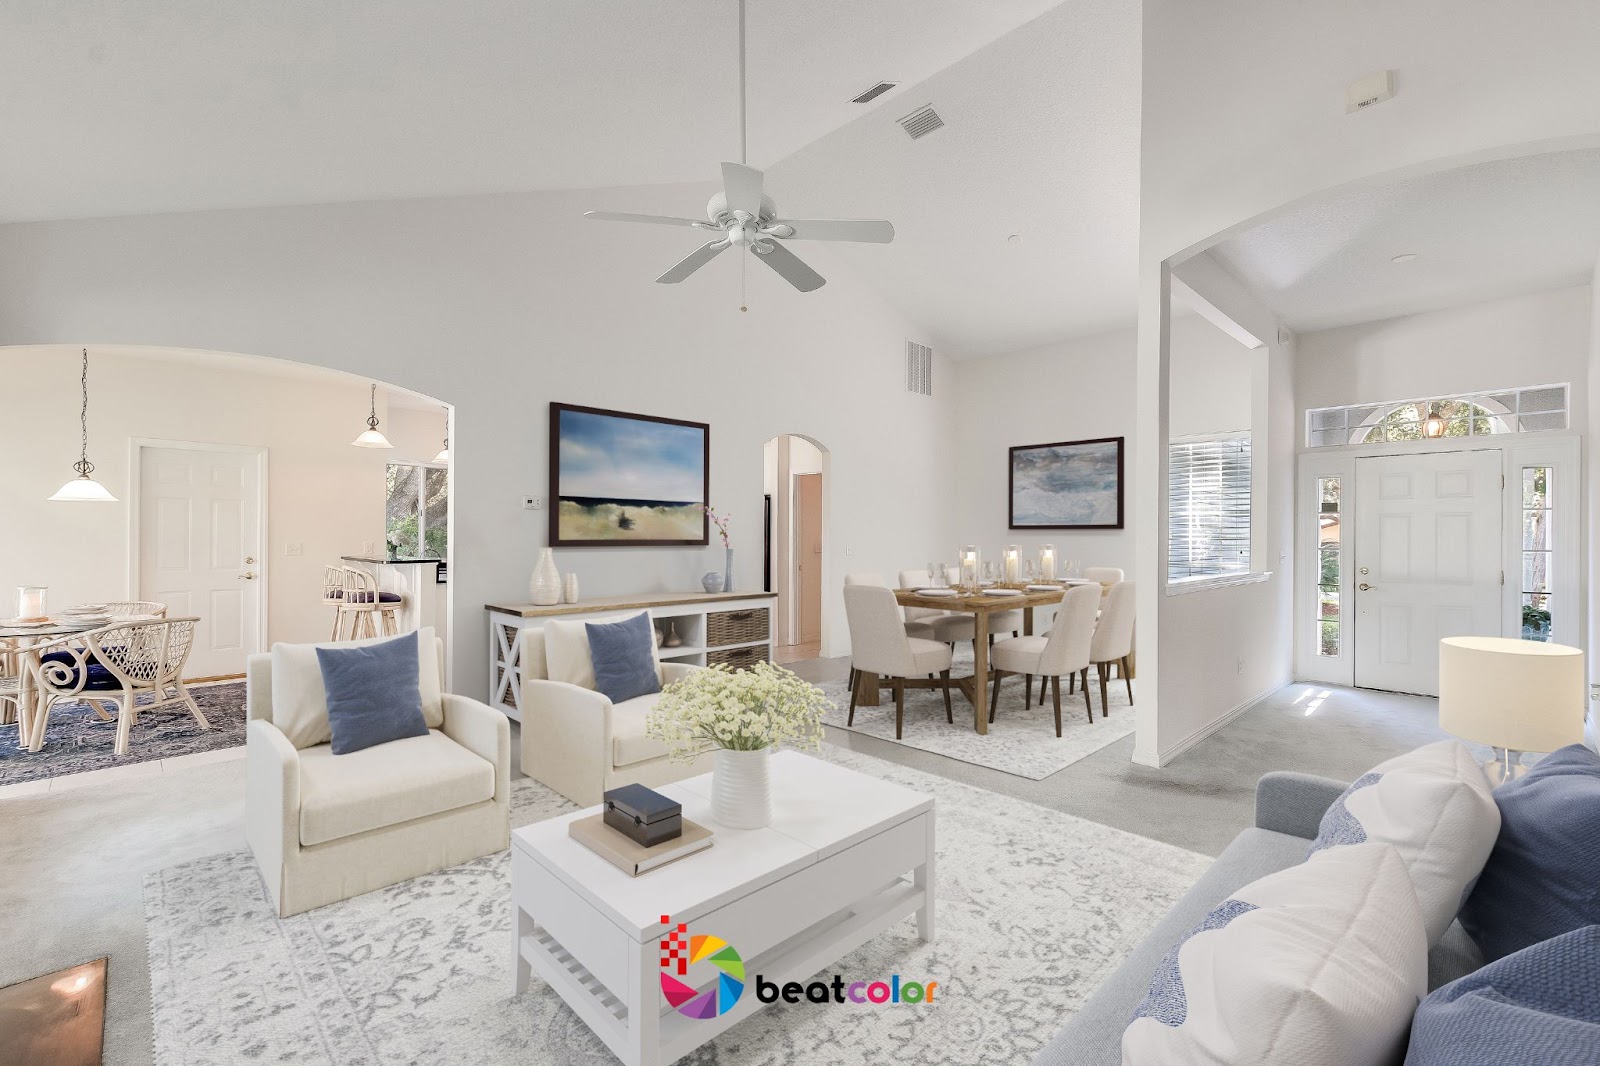 BeatColor-real estate photo editing staging image